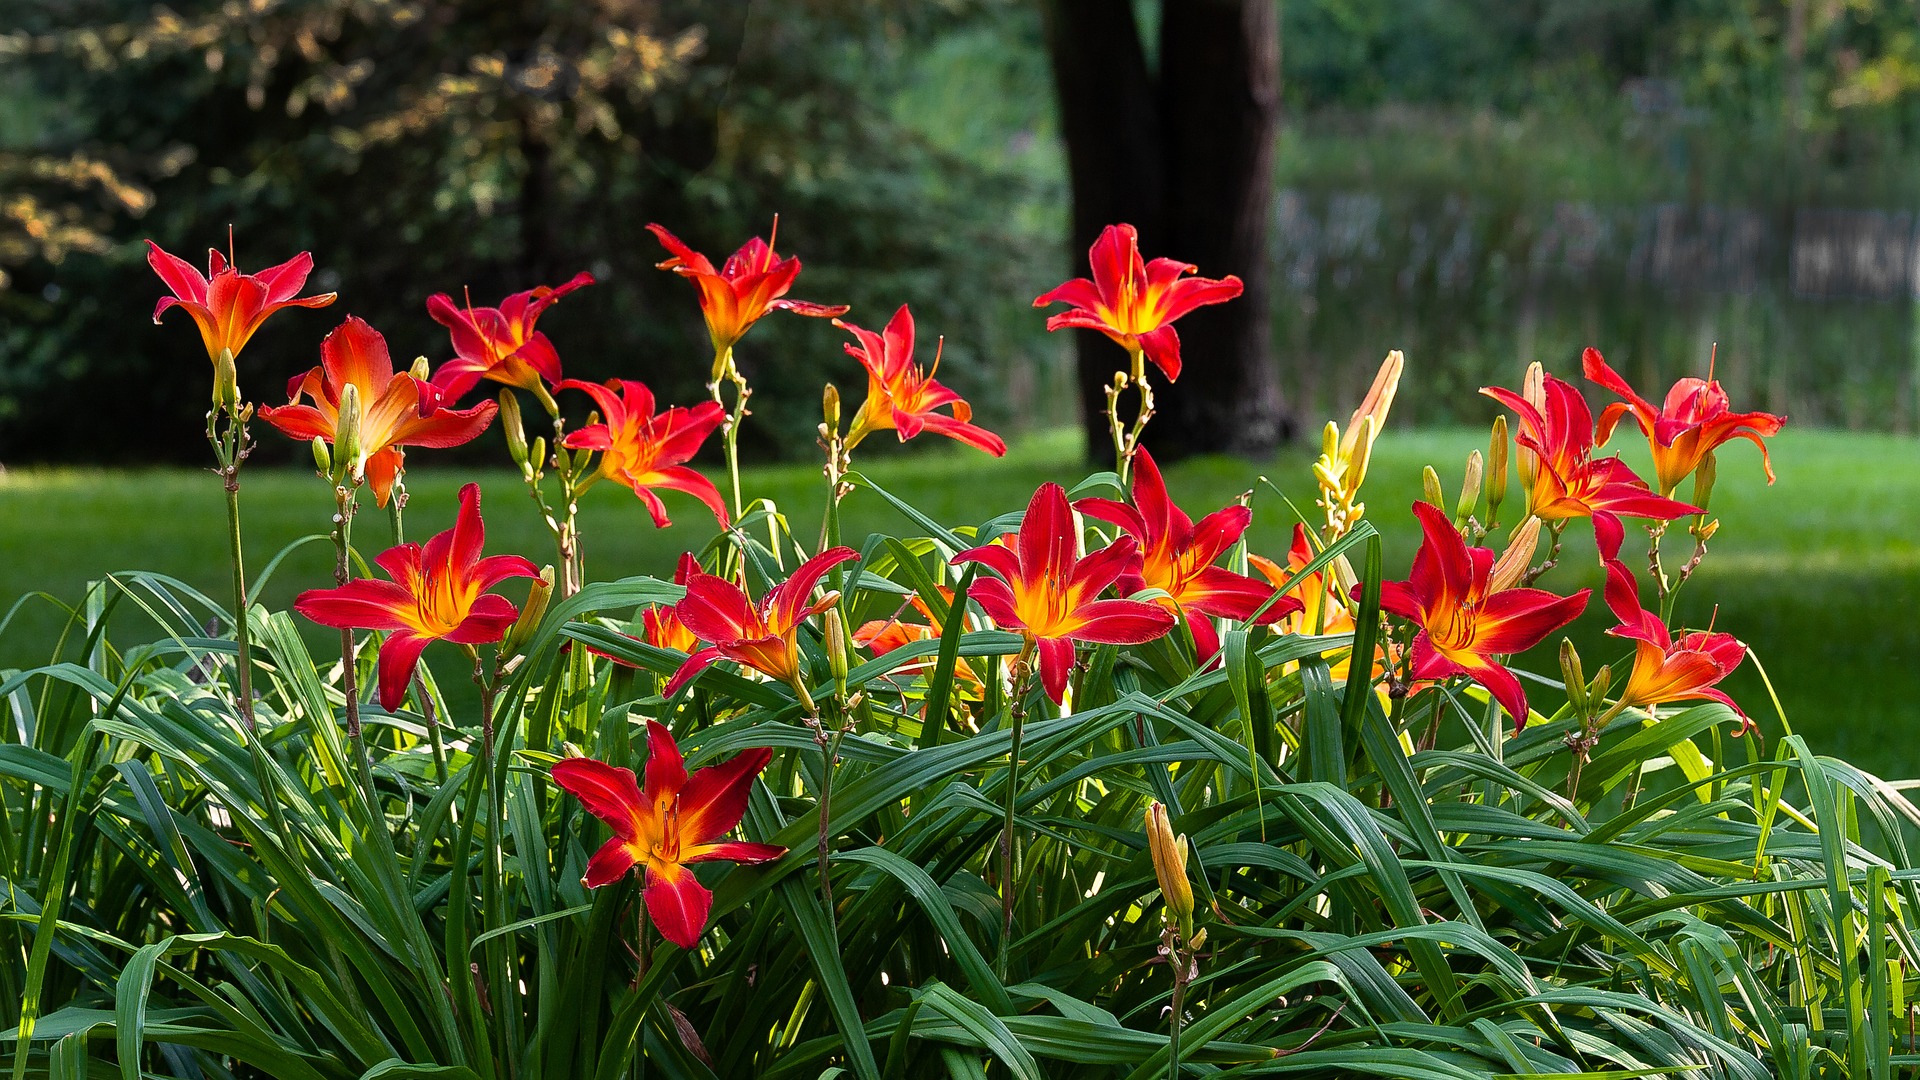 Daylilies like the red ones pictured here are a great addition to perennial landscaping.